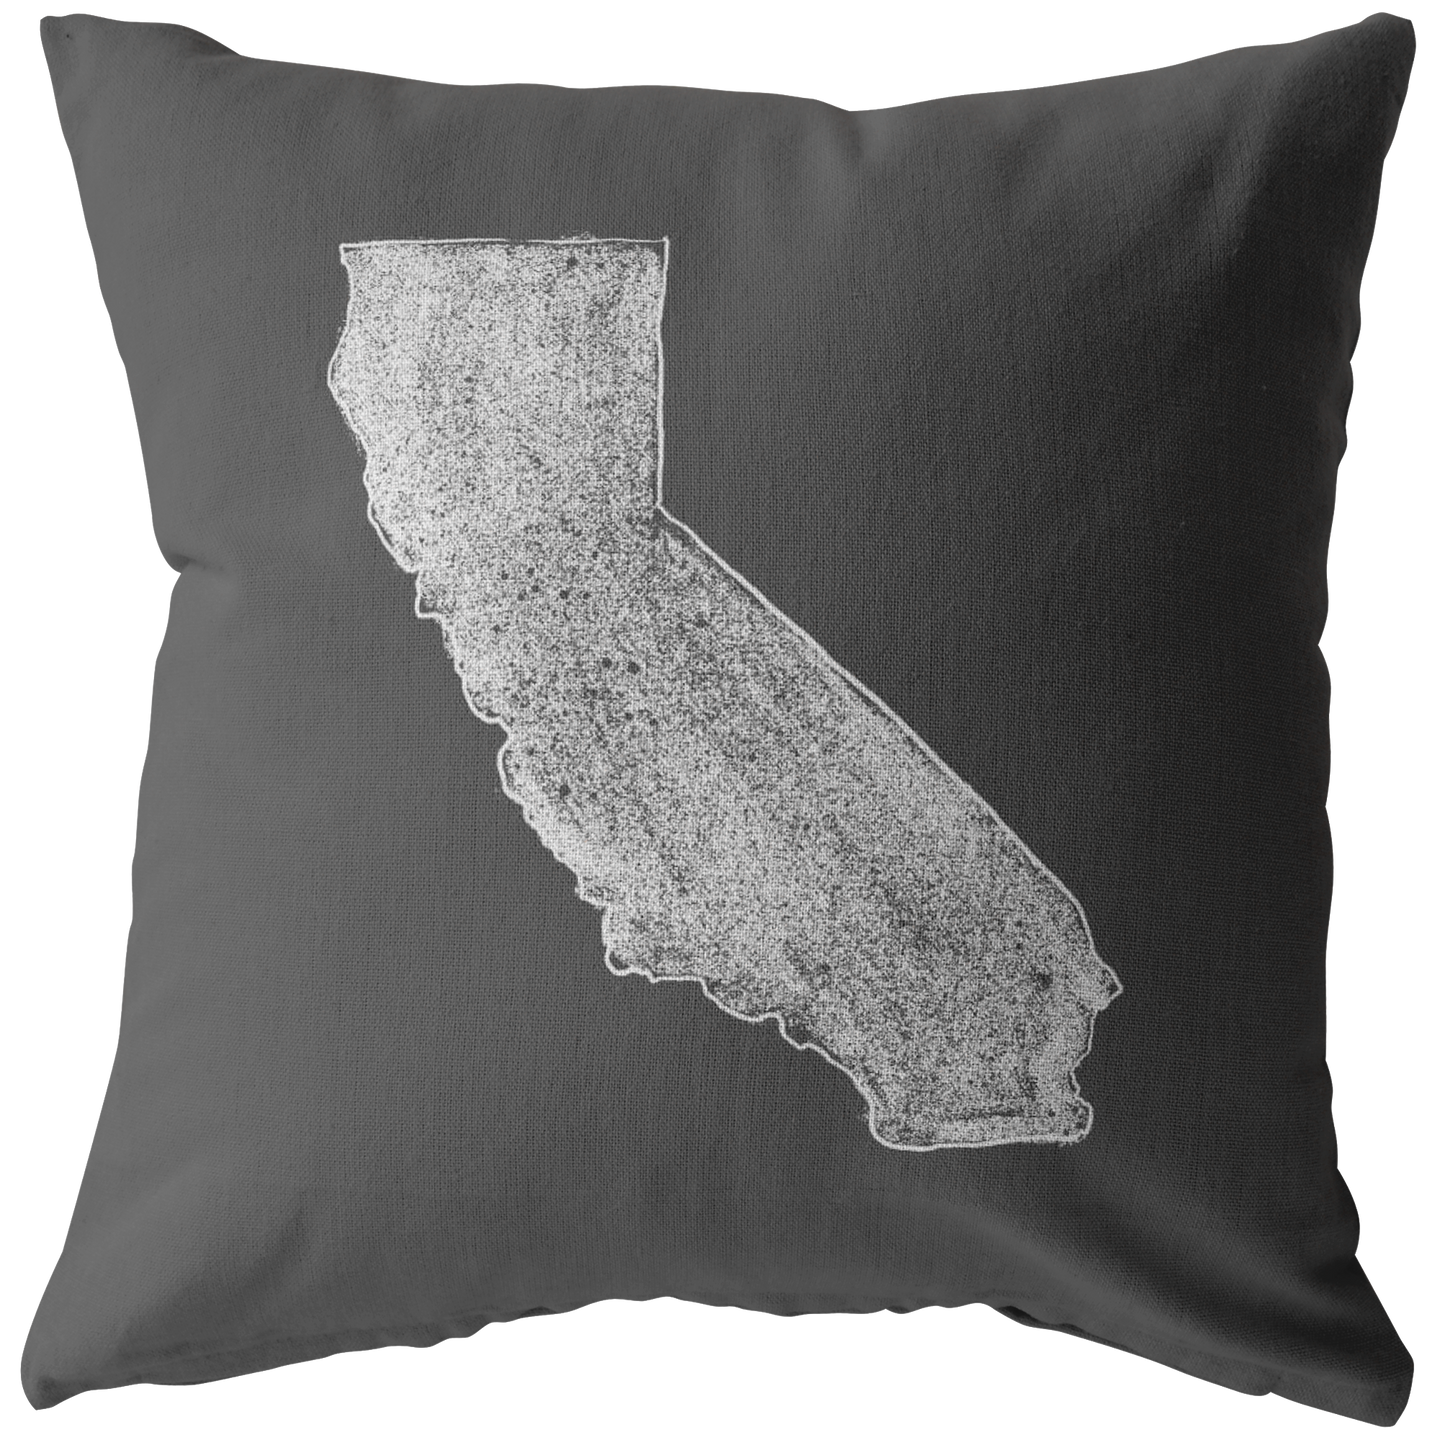 California Dreamin' Throw Pillow - White on Charcoal - The Coffee Catalyst